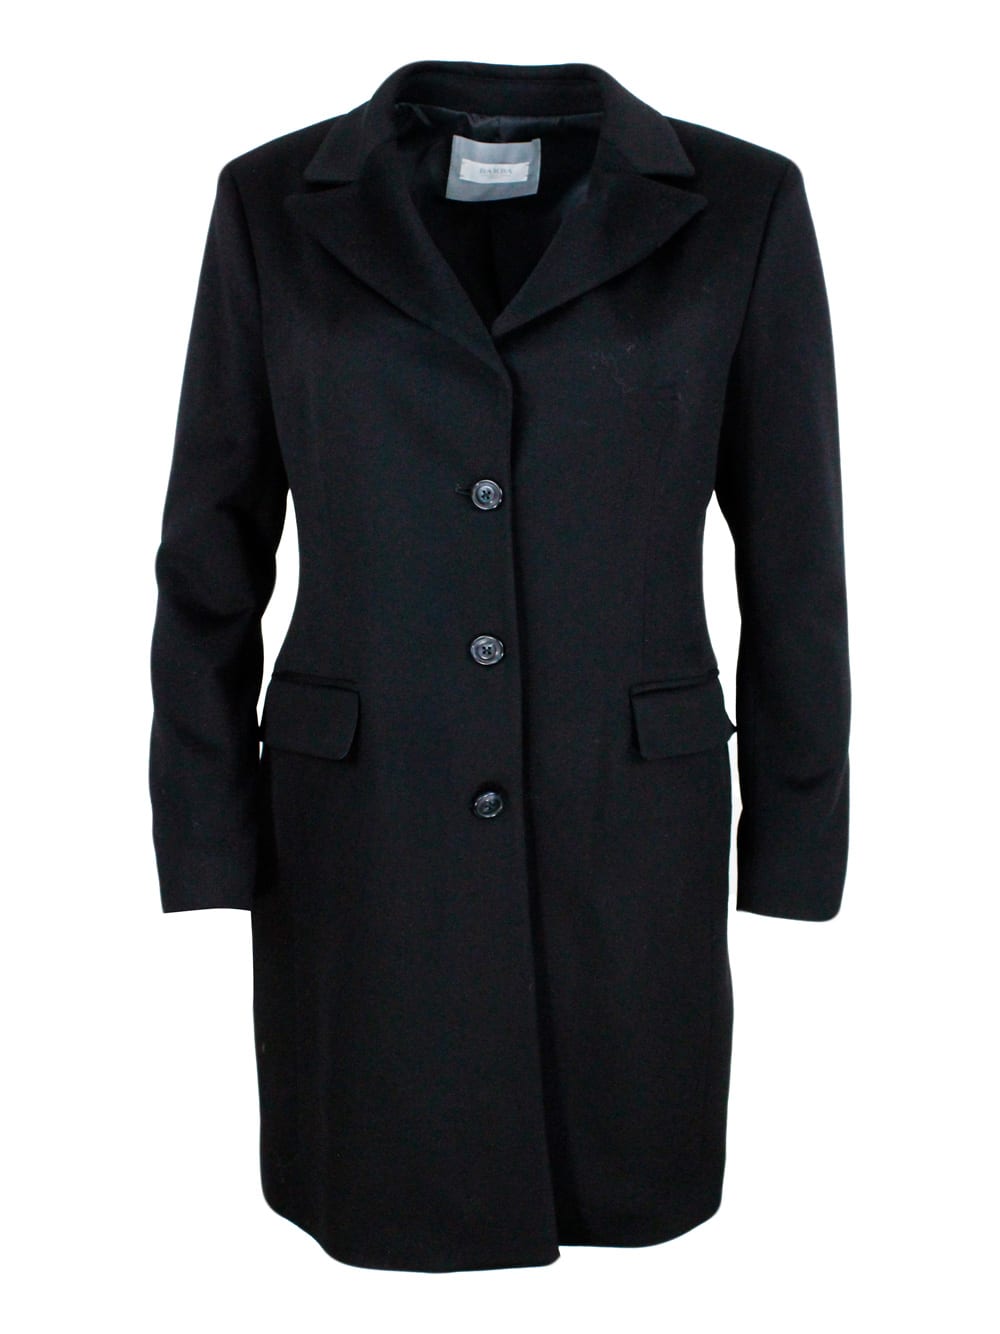 Single-breasted Coat Made Of Soft And Precious Cashmere With Flap Pockets And Button Closure. Matching Inner Lining. Side By Side Slim Line